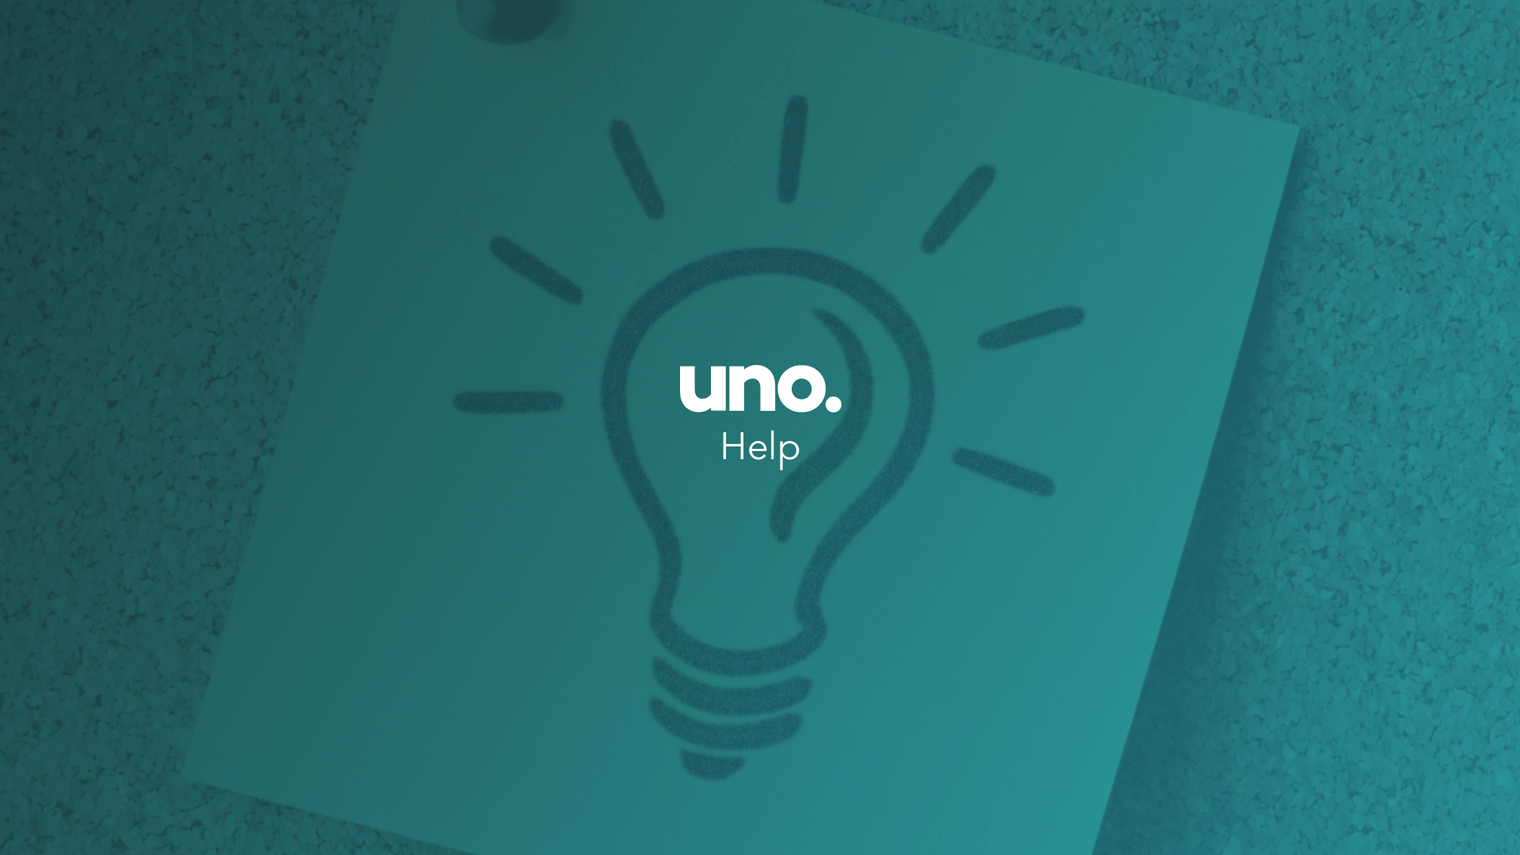 How is uno different from online comparison sites?